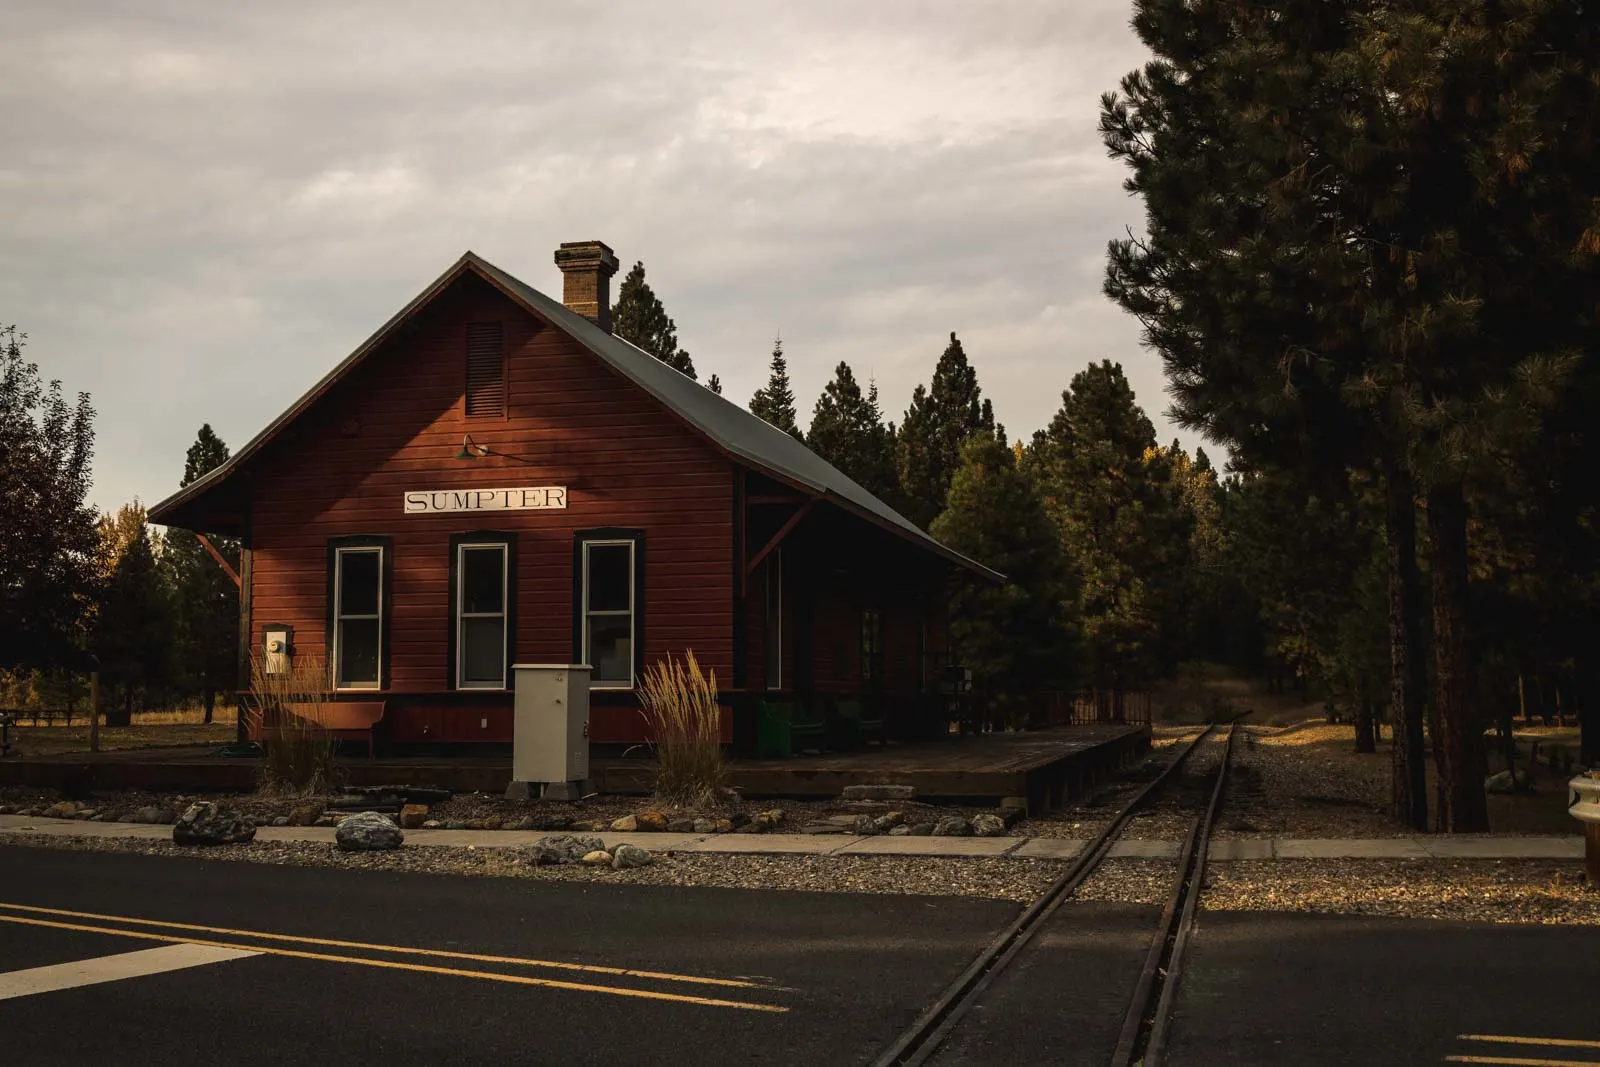 View of Sumpter Train Station